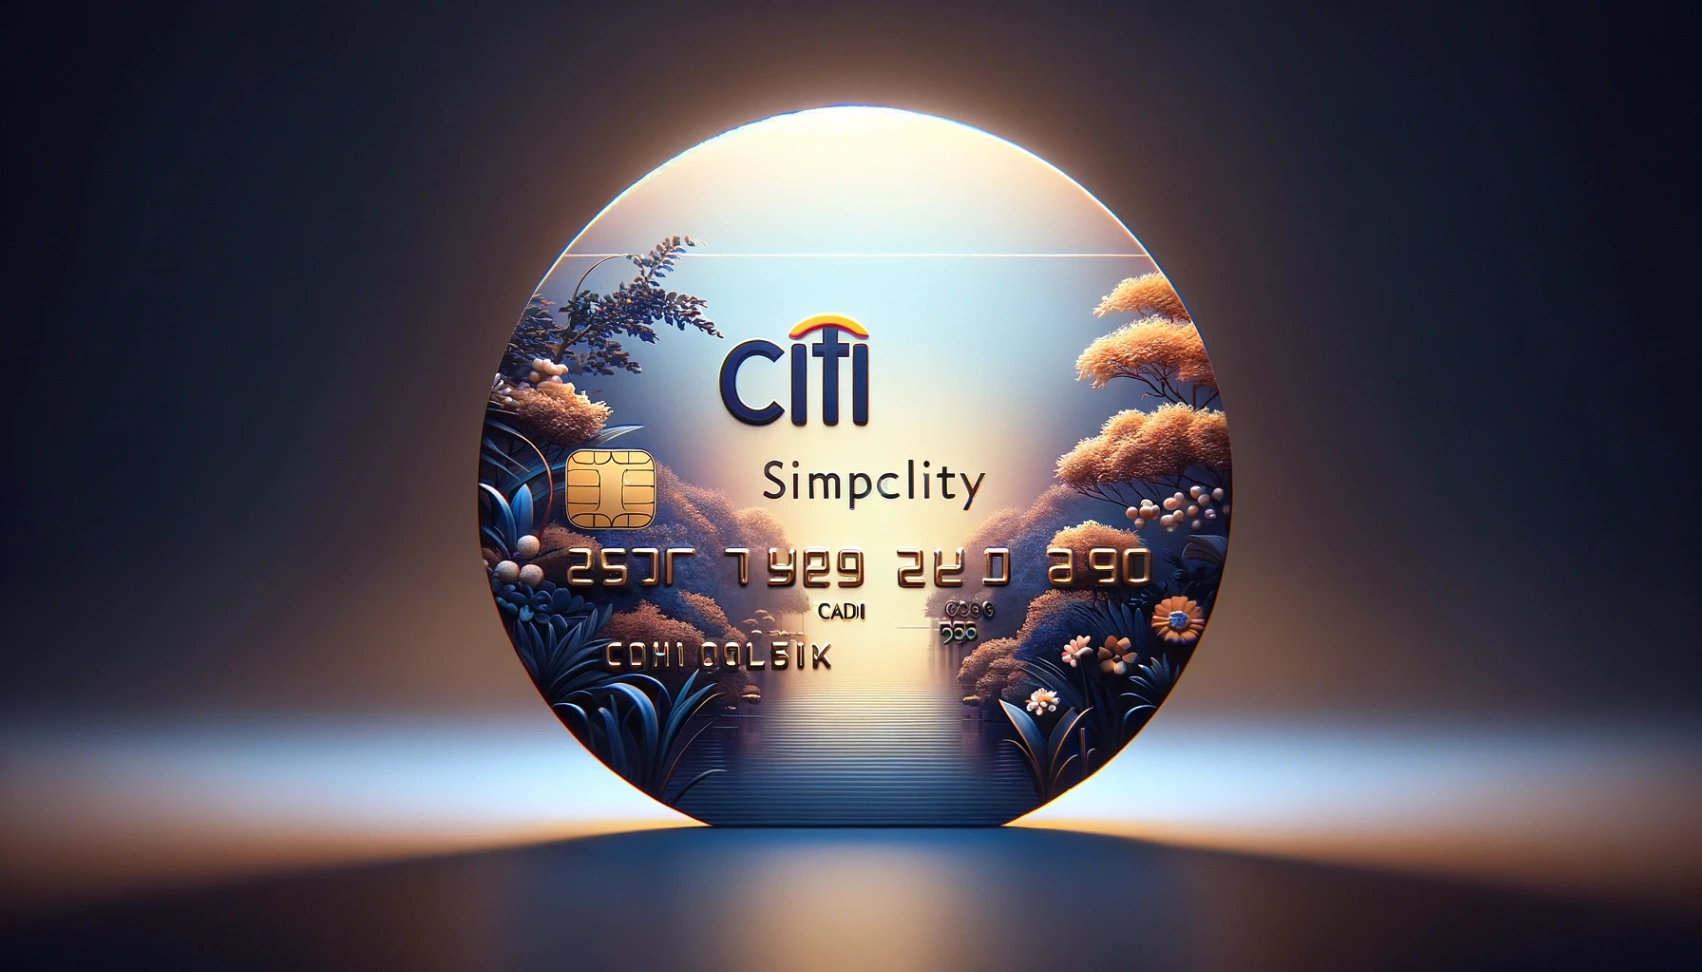 Citi Simplicity Credit Card – Learn How to Apply Online